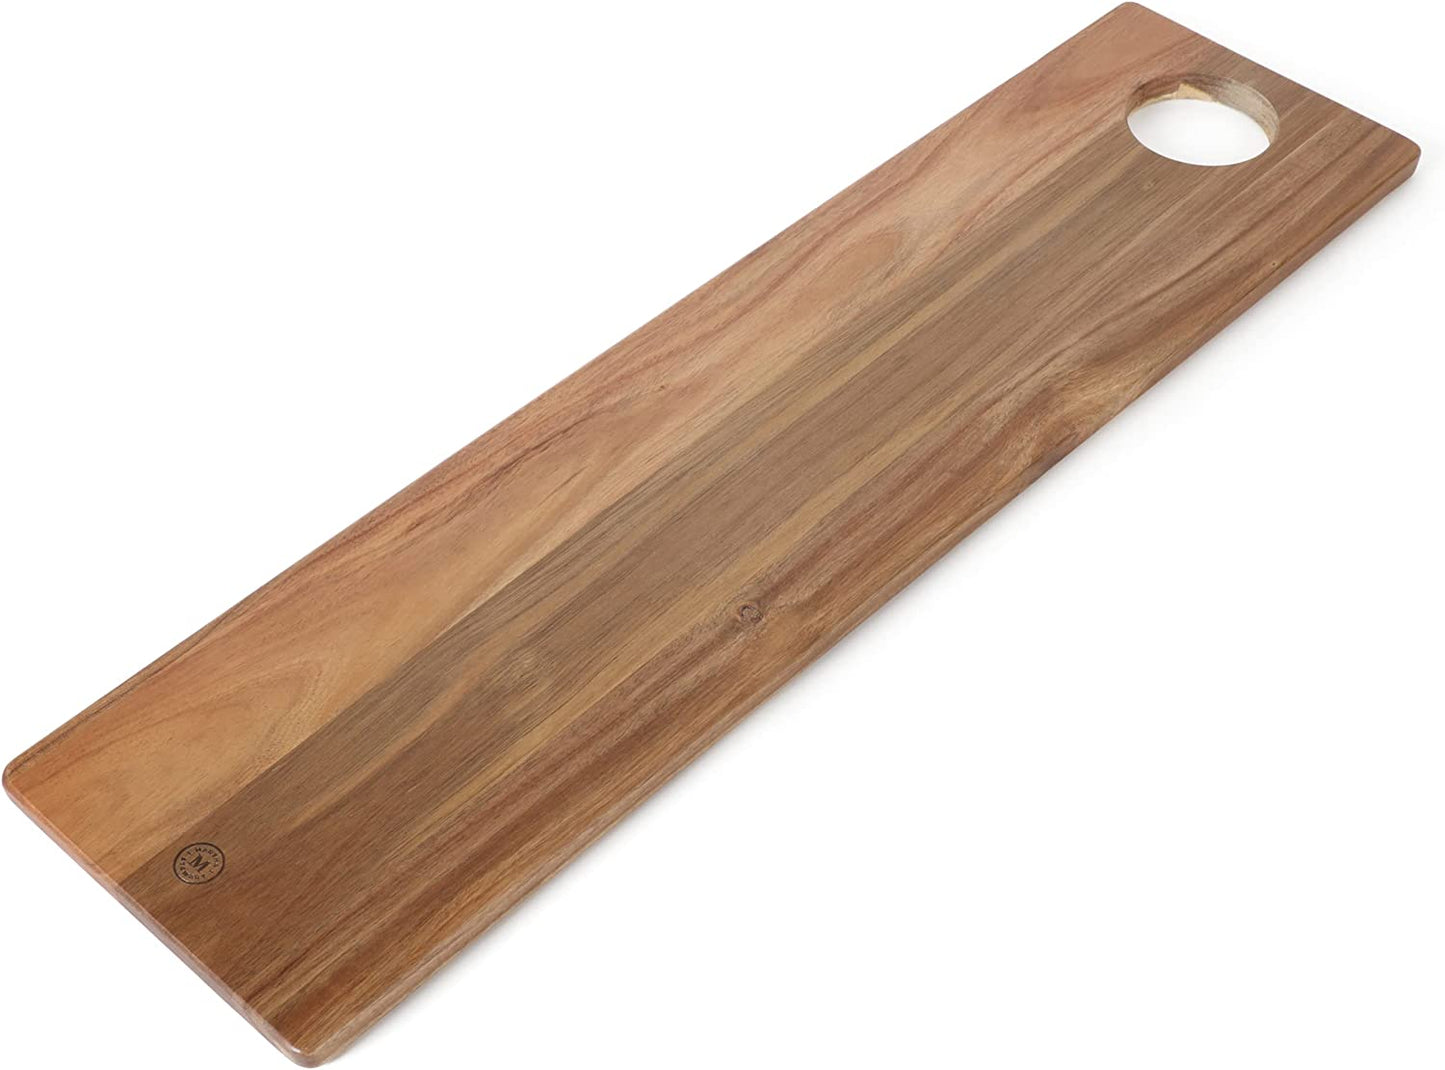 Charcot 31.5 X 8 Large Charcuterie Serving Board - Acacia Wood